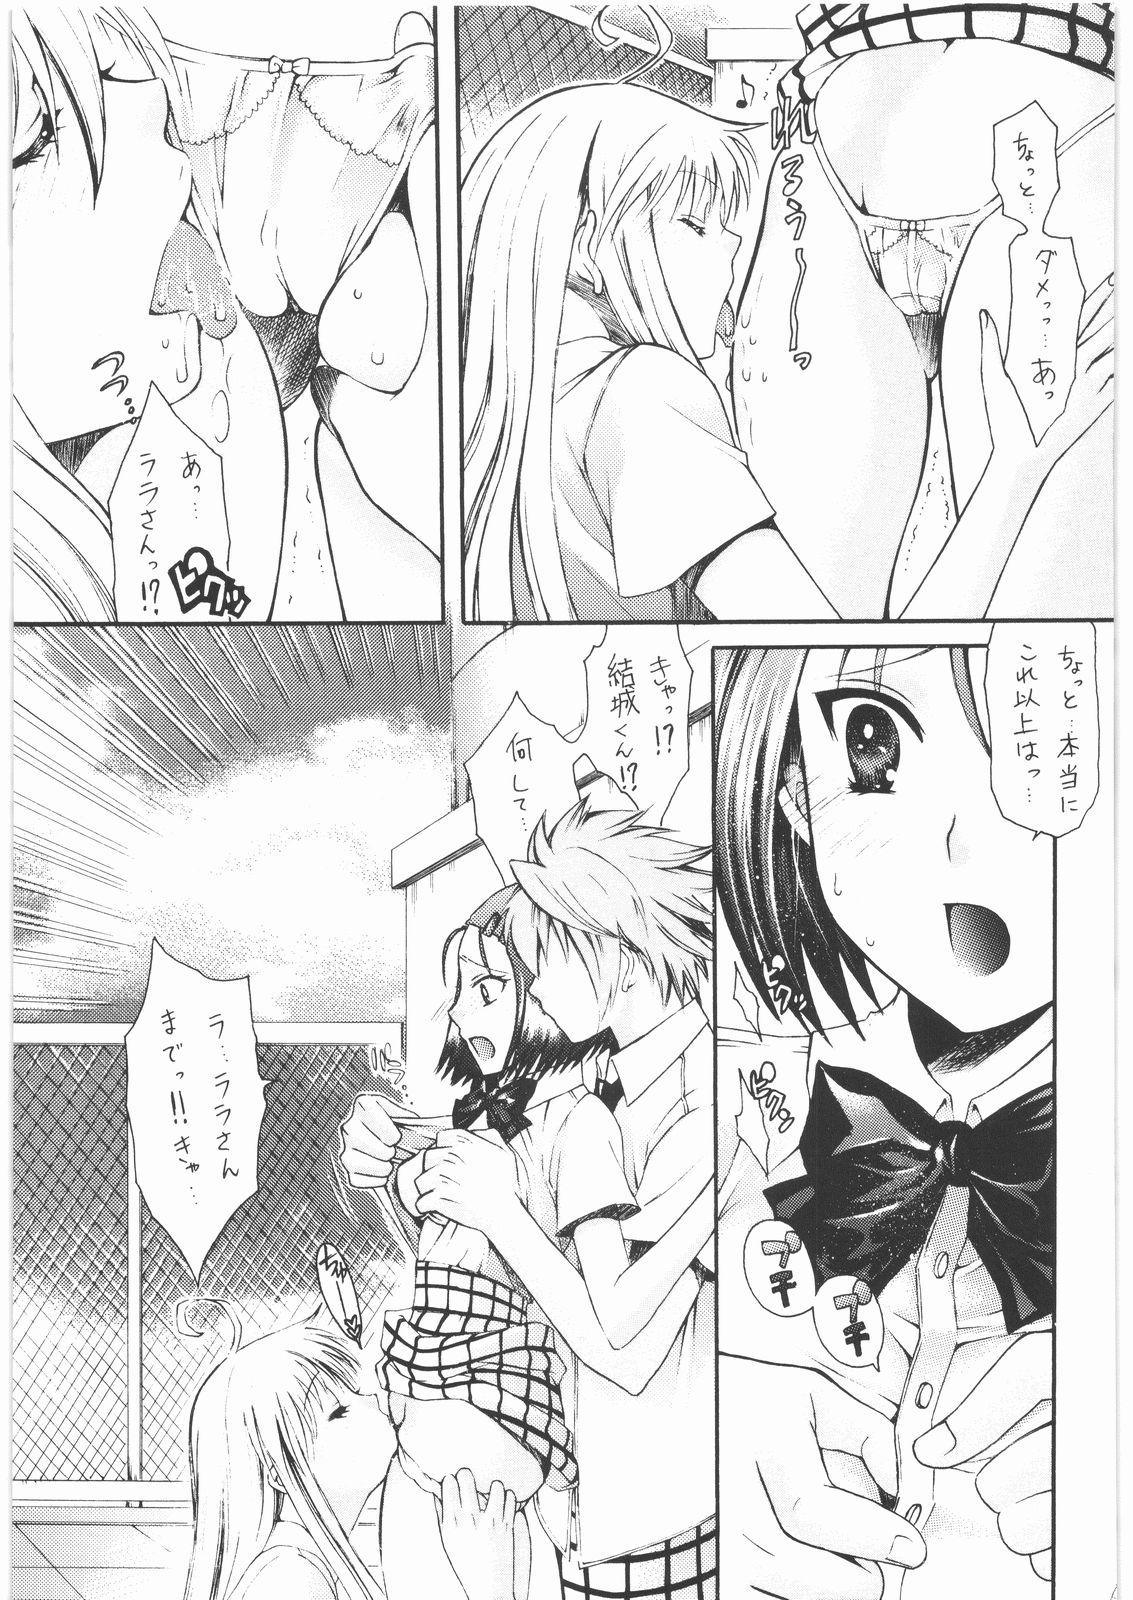 Old Omisore! ToLOVE-ru kko 2 - To love-ru Roughsex - Page 10